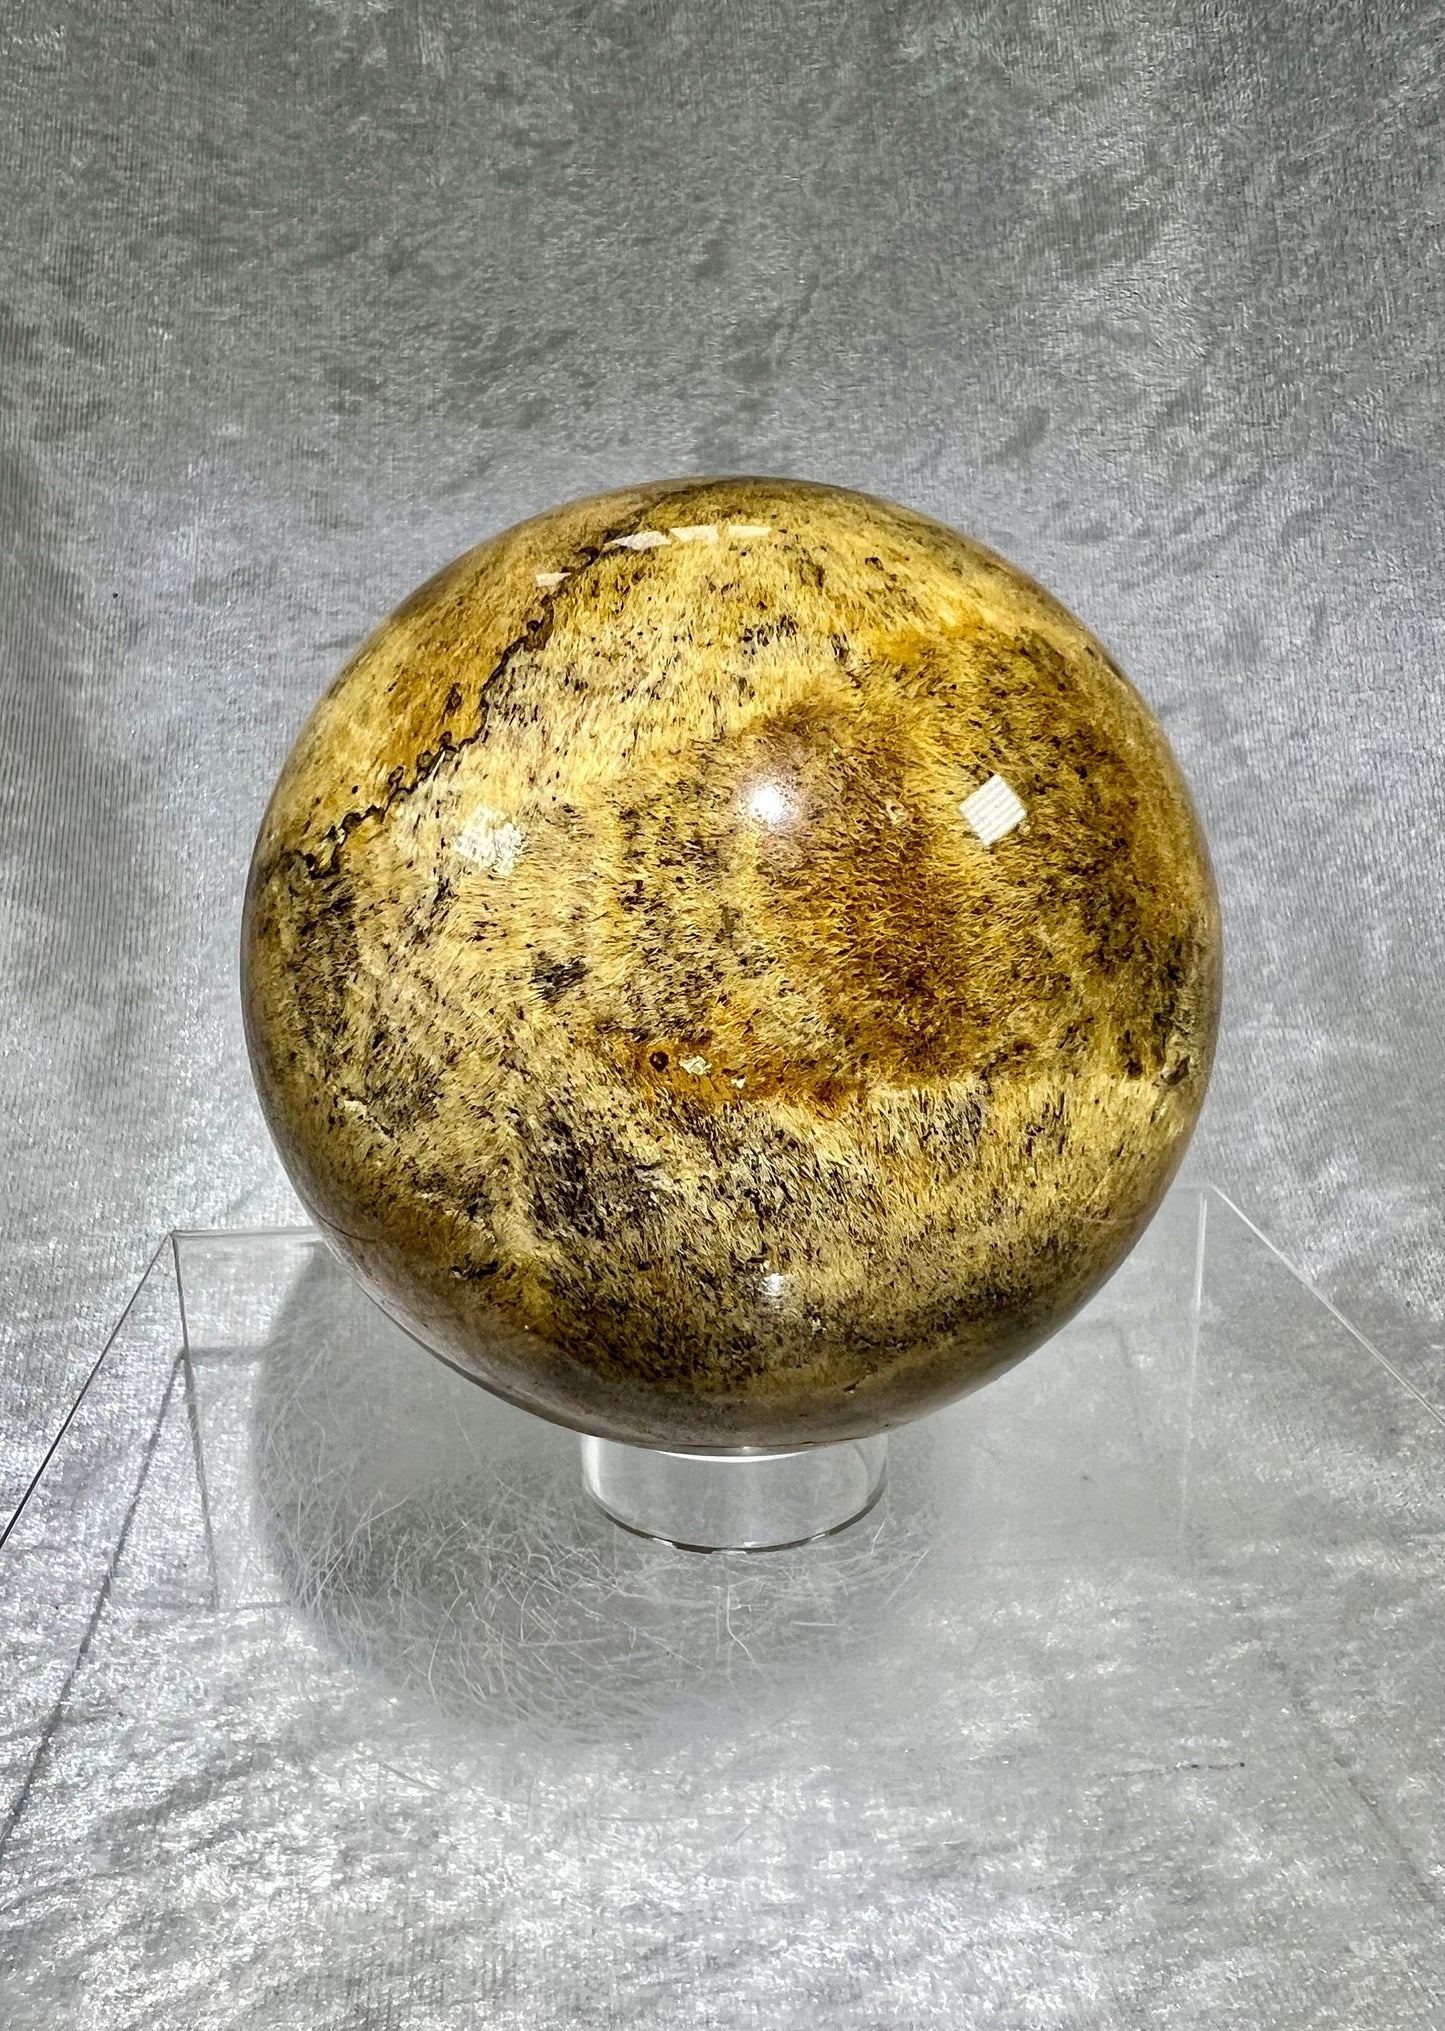 XL Rare Sagenite Agate Sphere. 87mm. High Quality Natural Sagenite Sphere. Beautiful Plume Inclusions